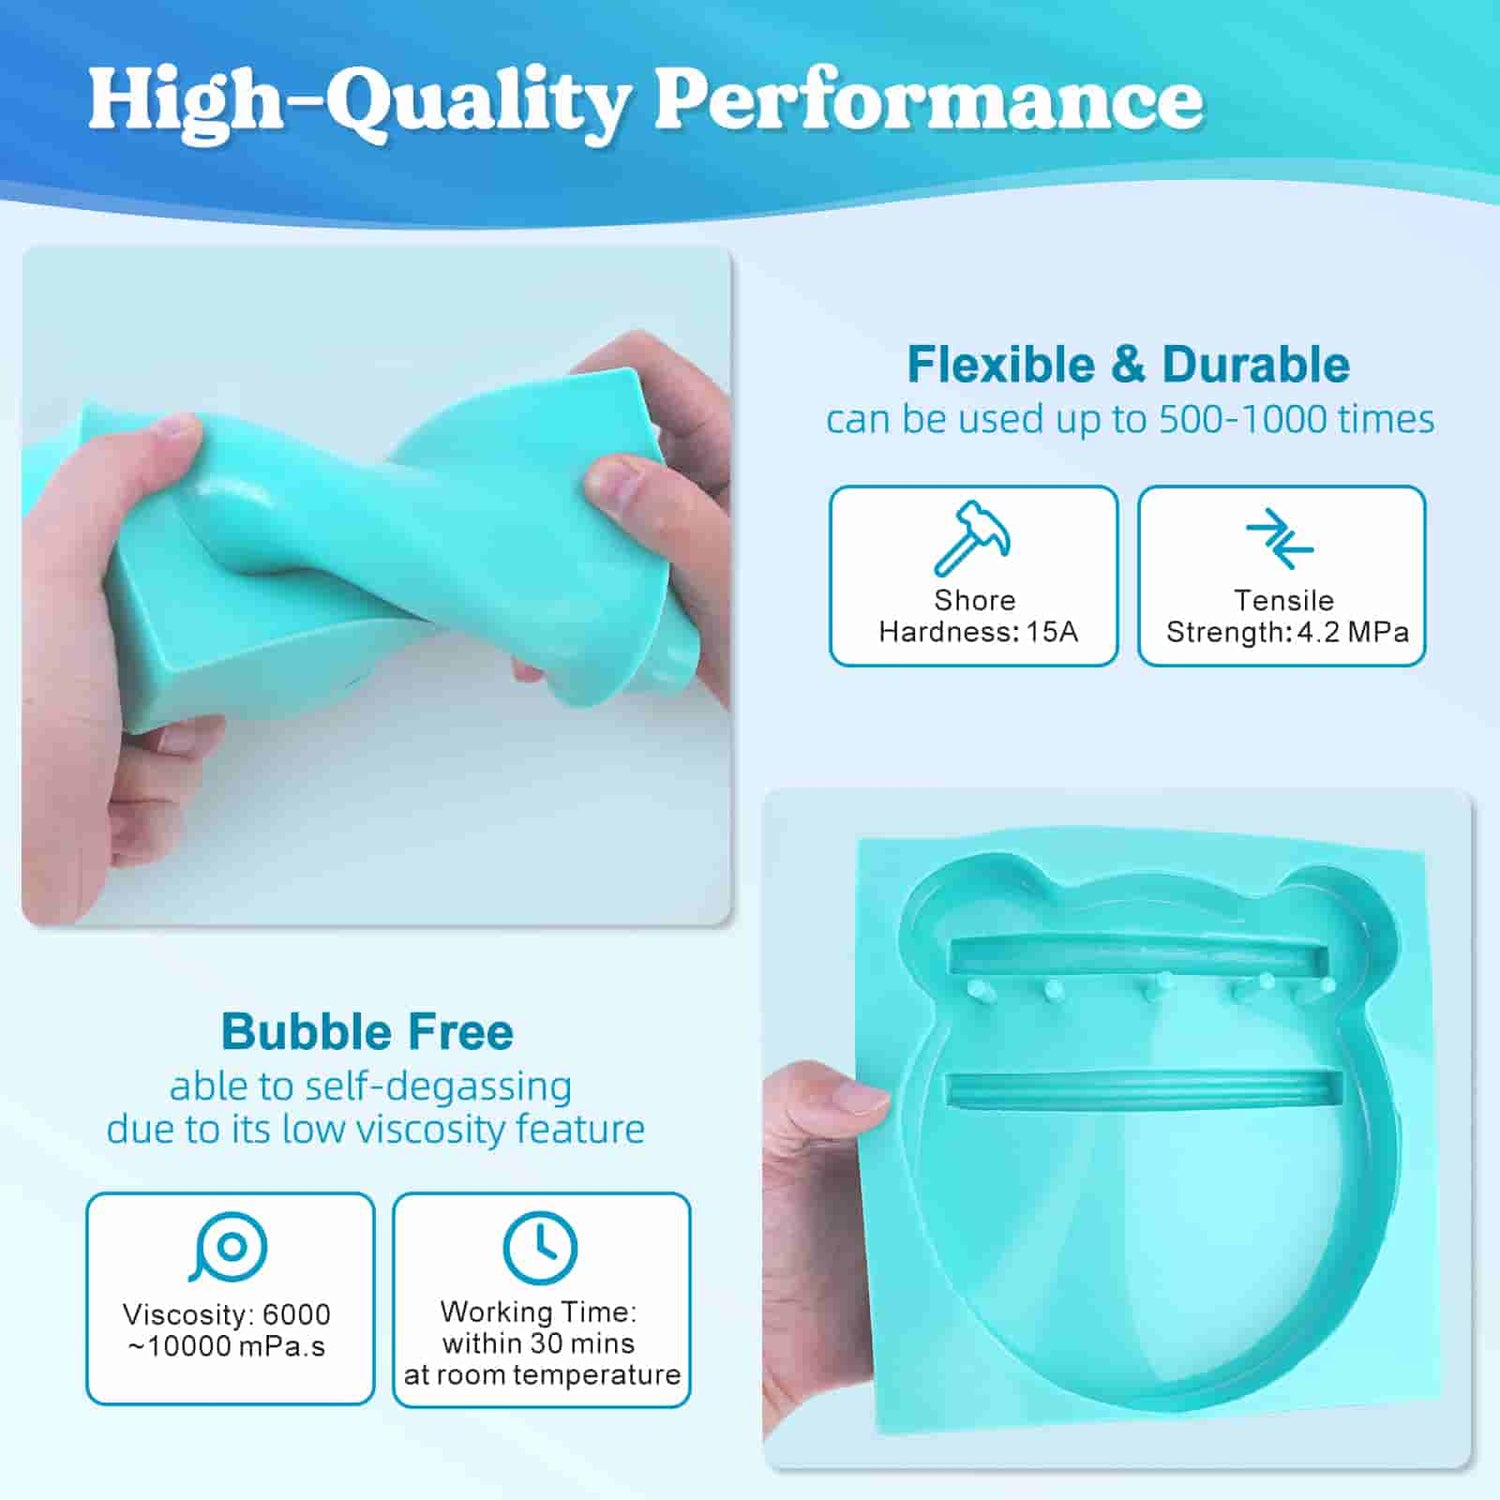 LET'S RESIN Silicone Mold Making Kit Translucent Silicone Rubber Non-toxic  Mixing Ratio 1:1 Ideal for Resin Moldsn.w 31.74oz 